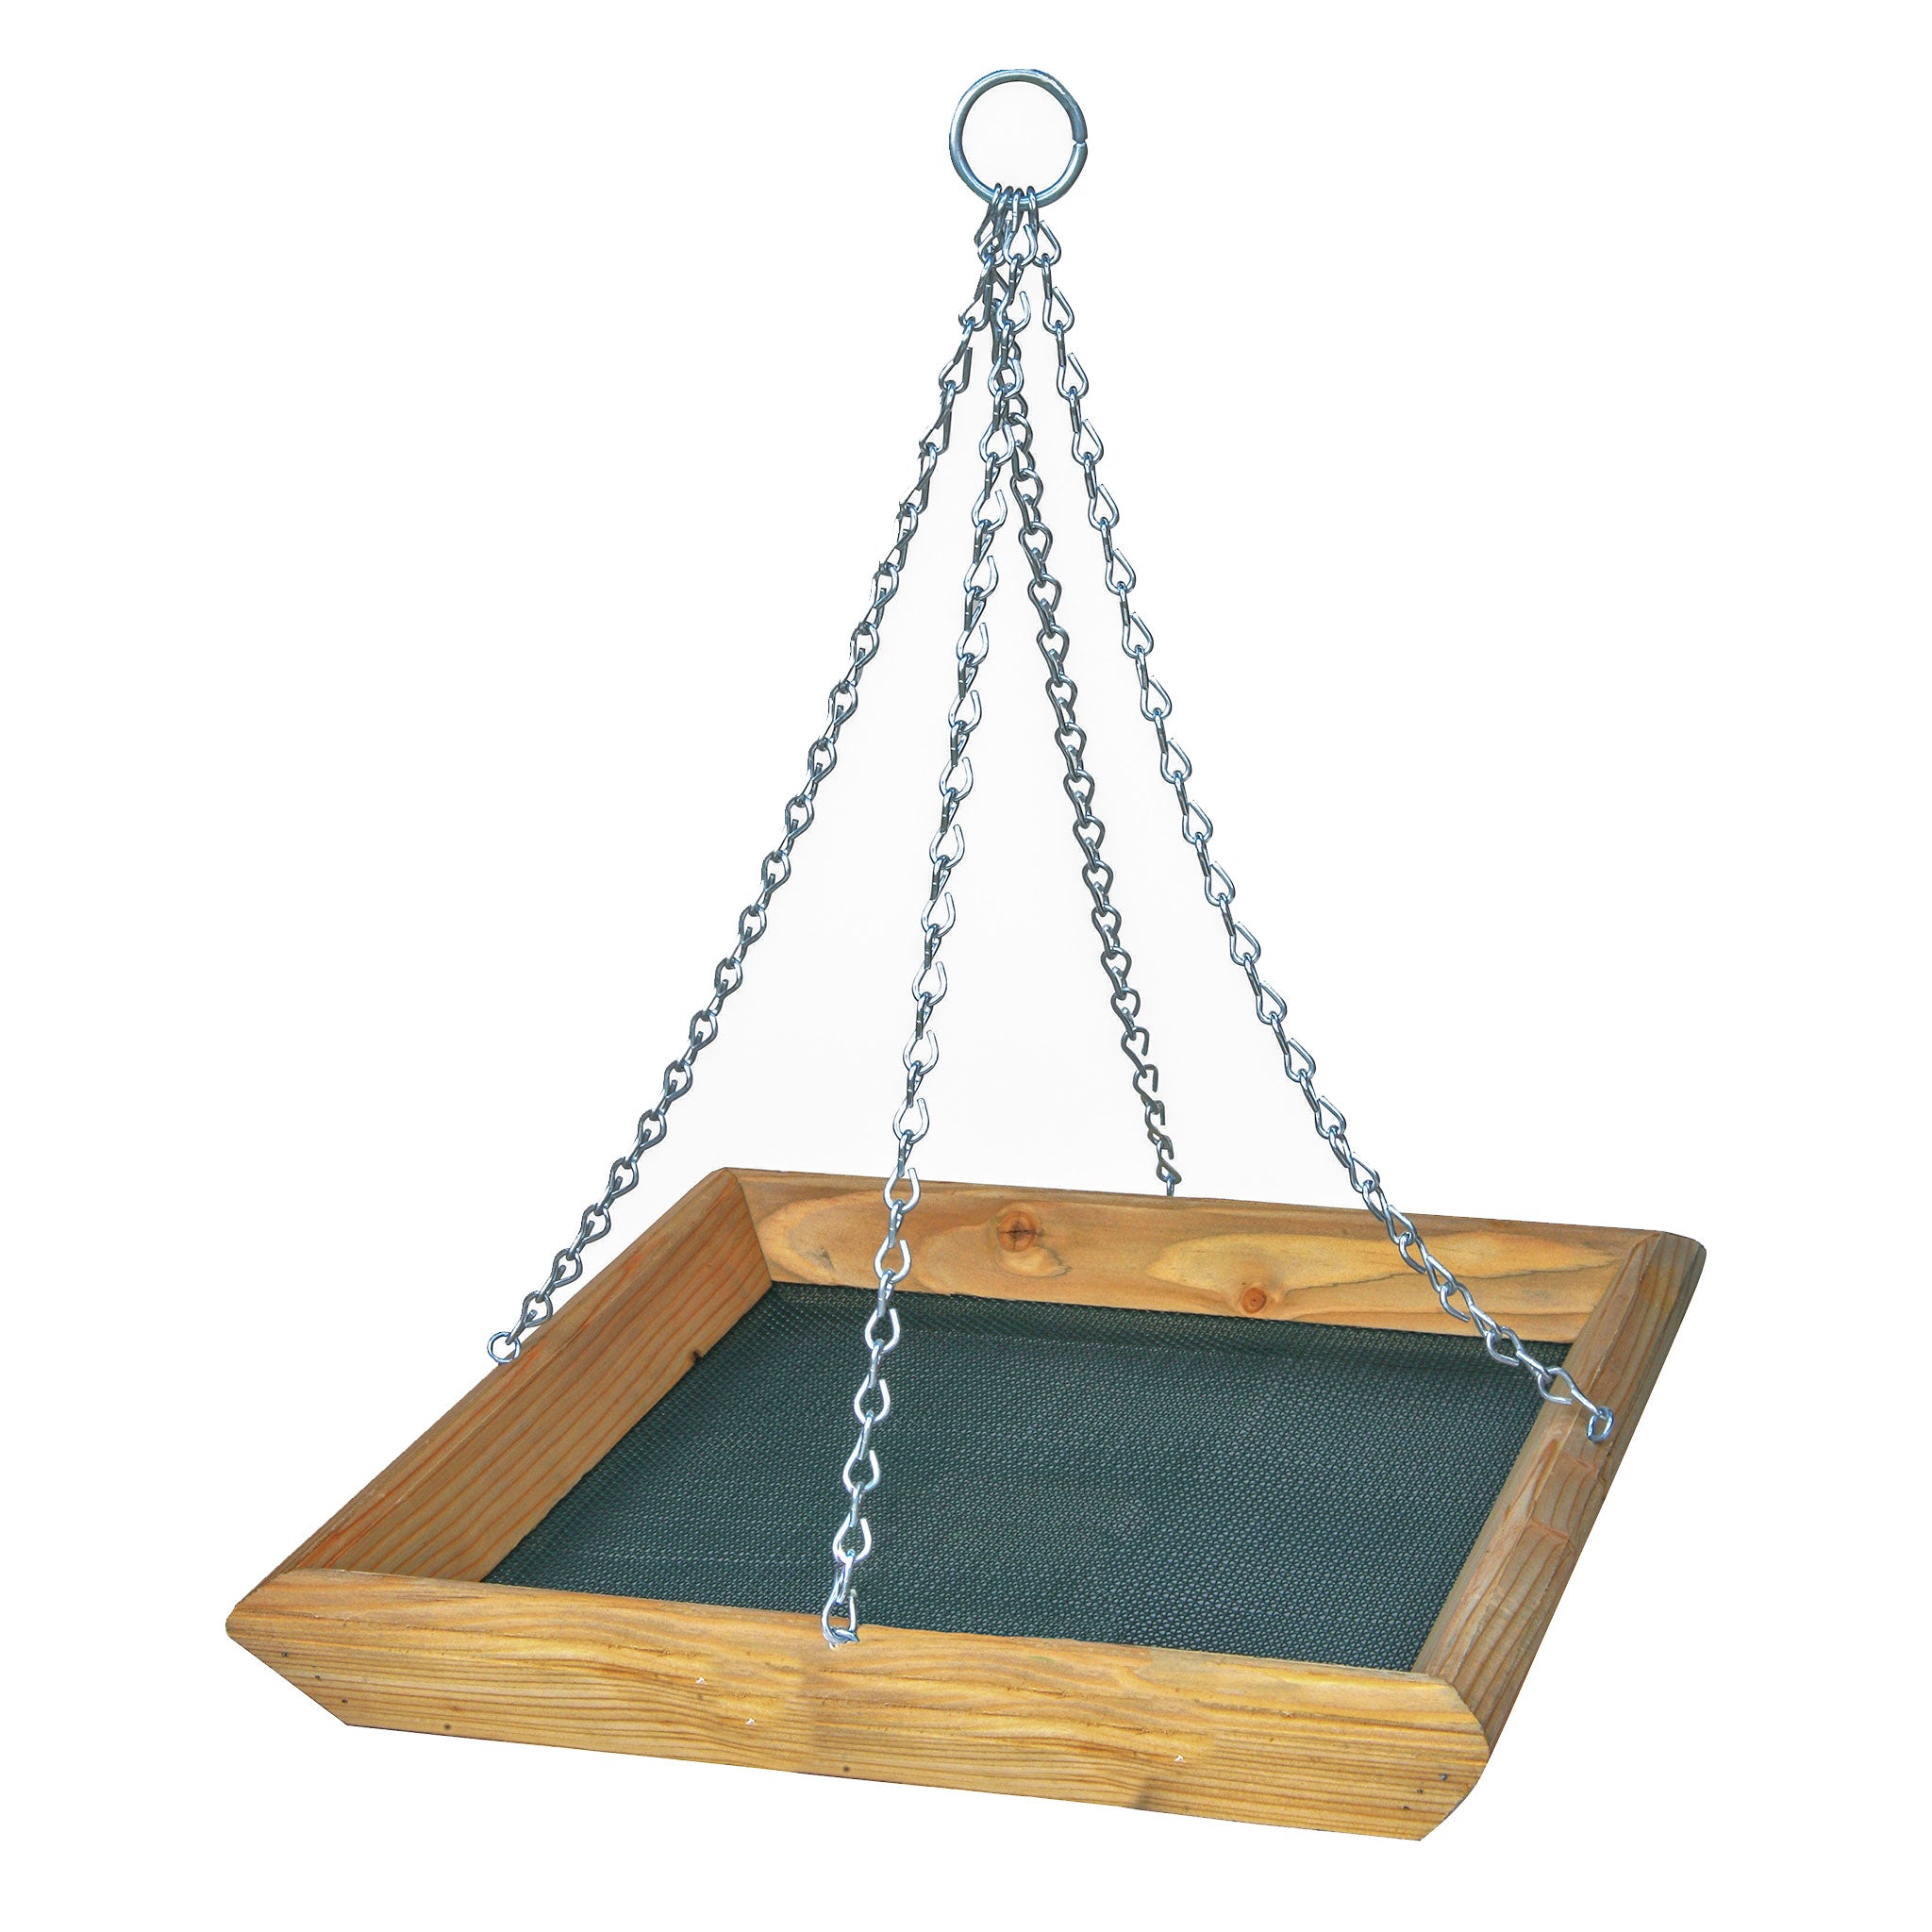 A hanging bird table on white background